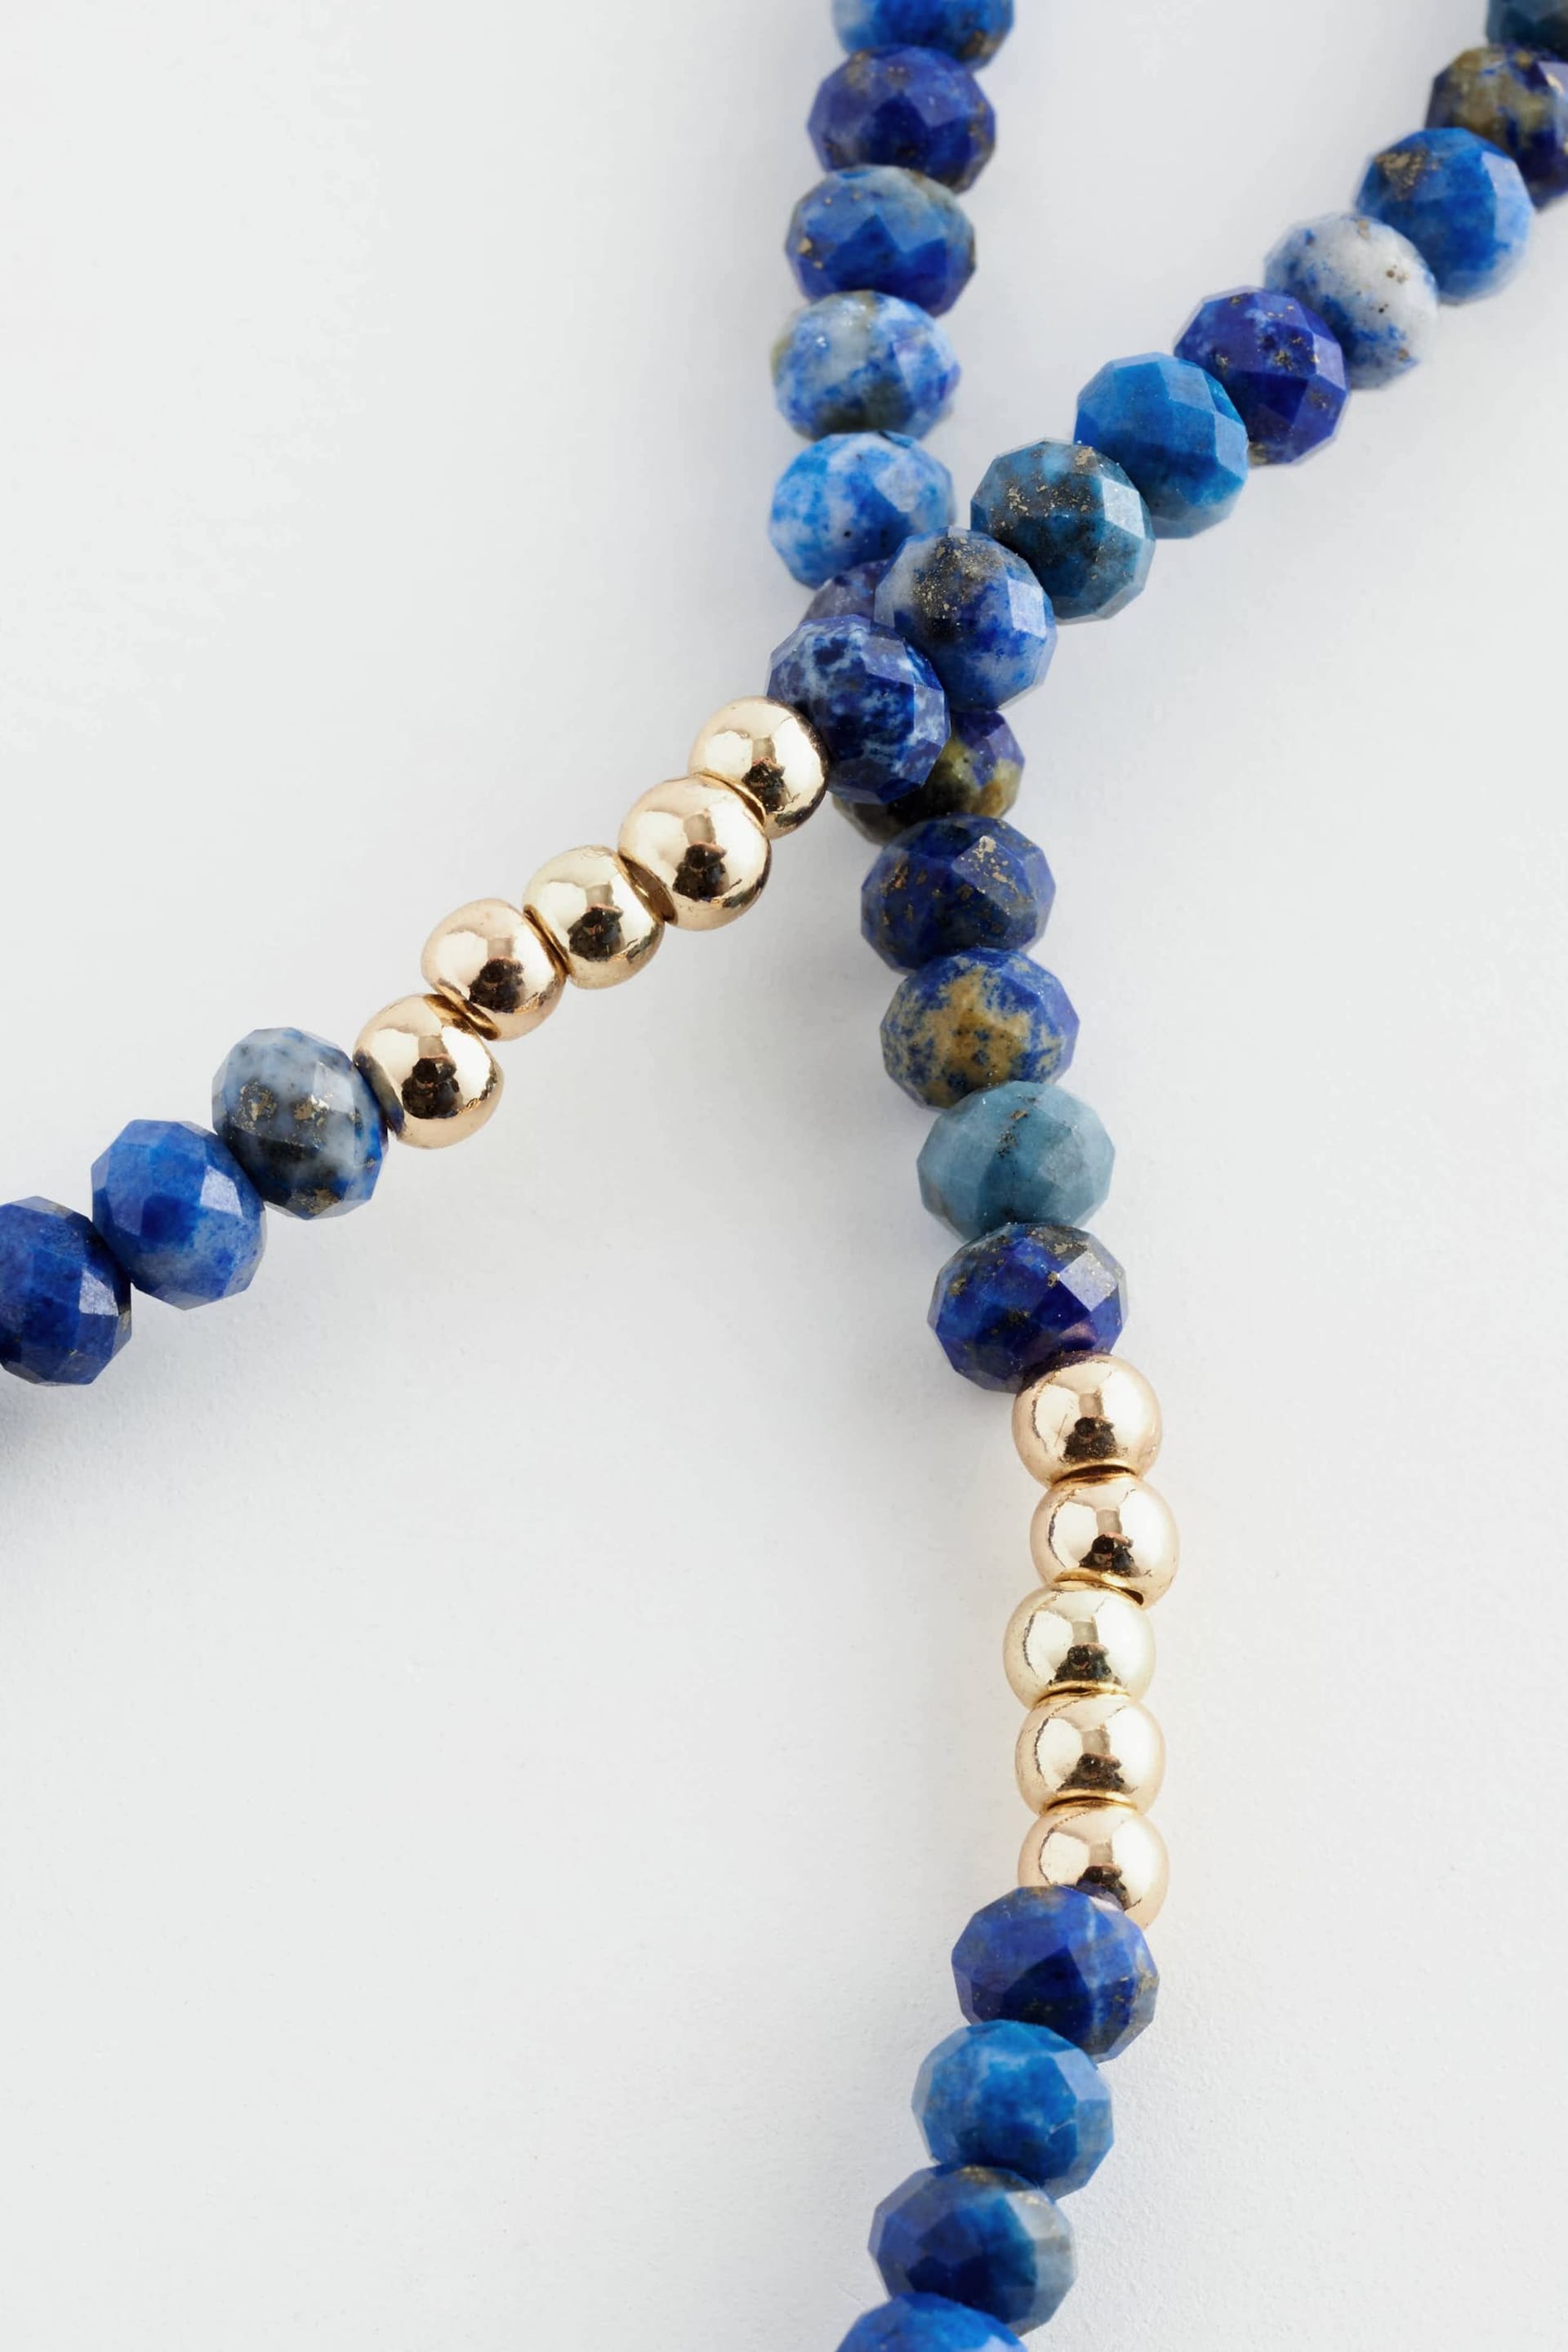 Blue Bead Short Necklace - Image 3 of 3